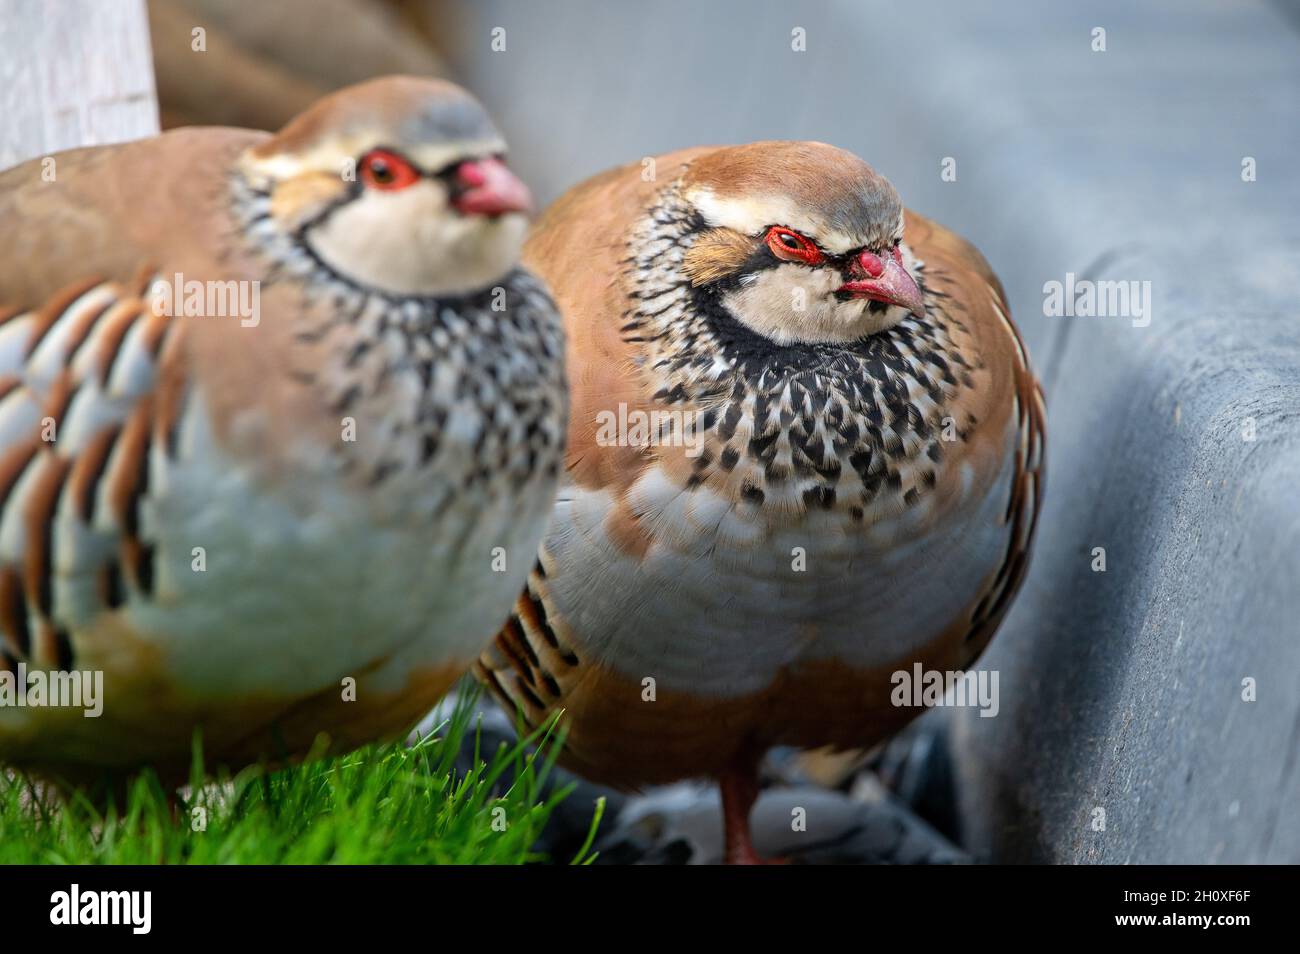 Red Legged Partridge in a garden setting Stock Photo